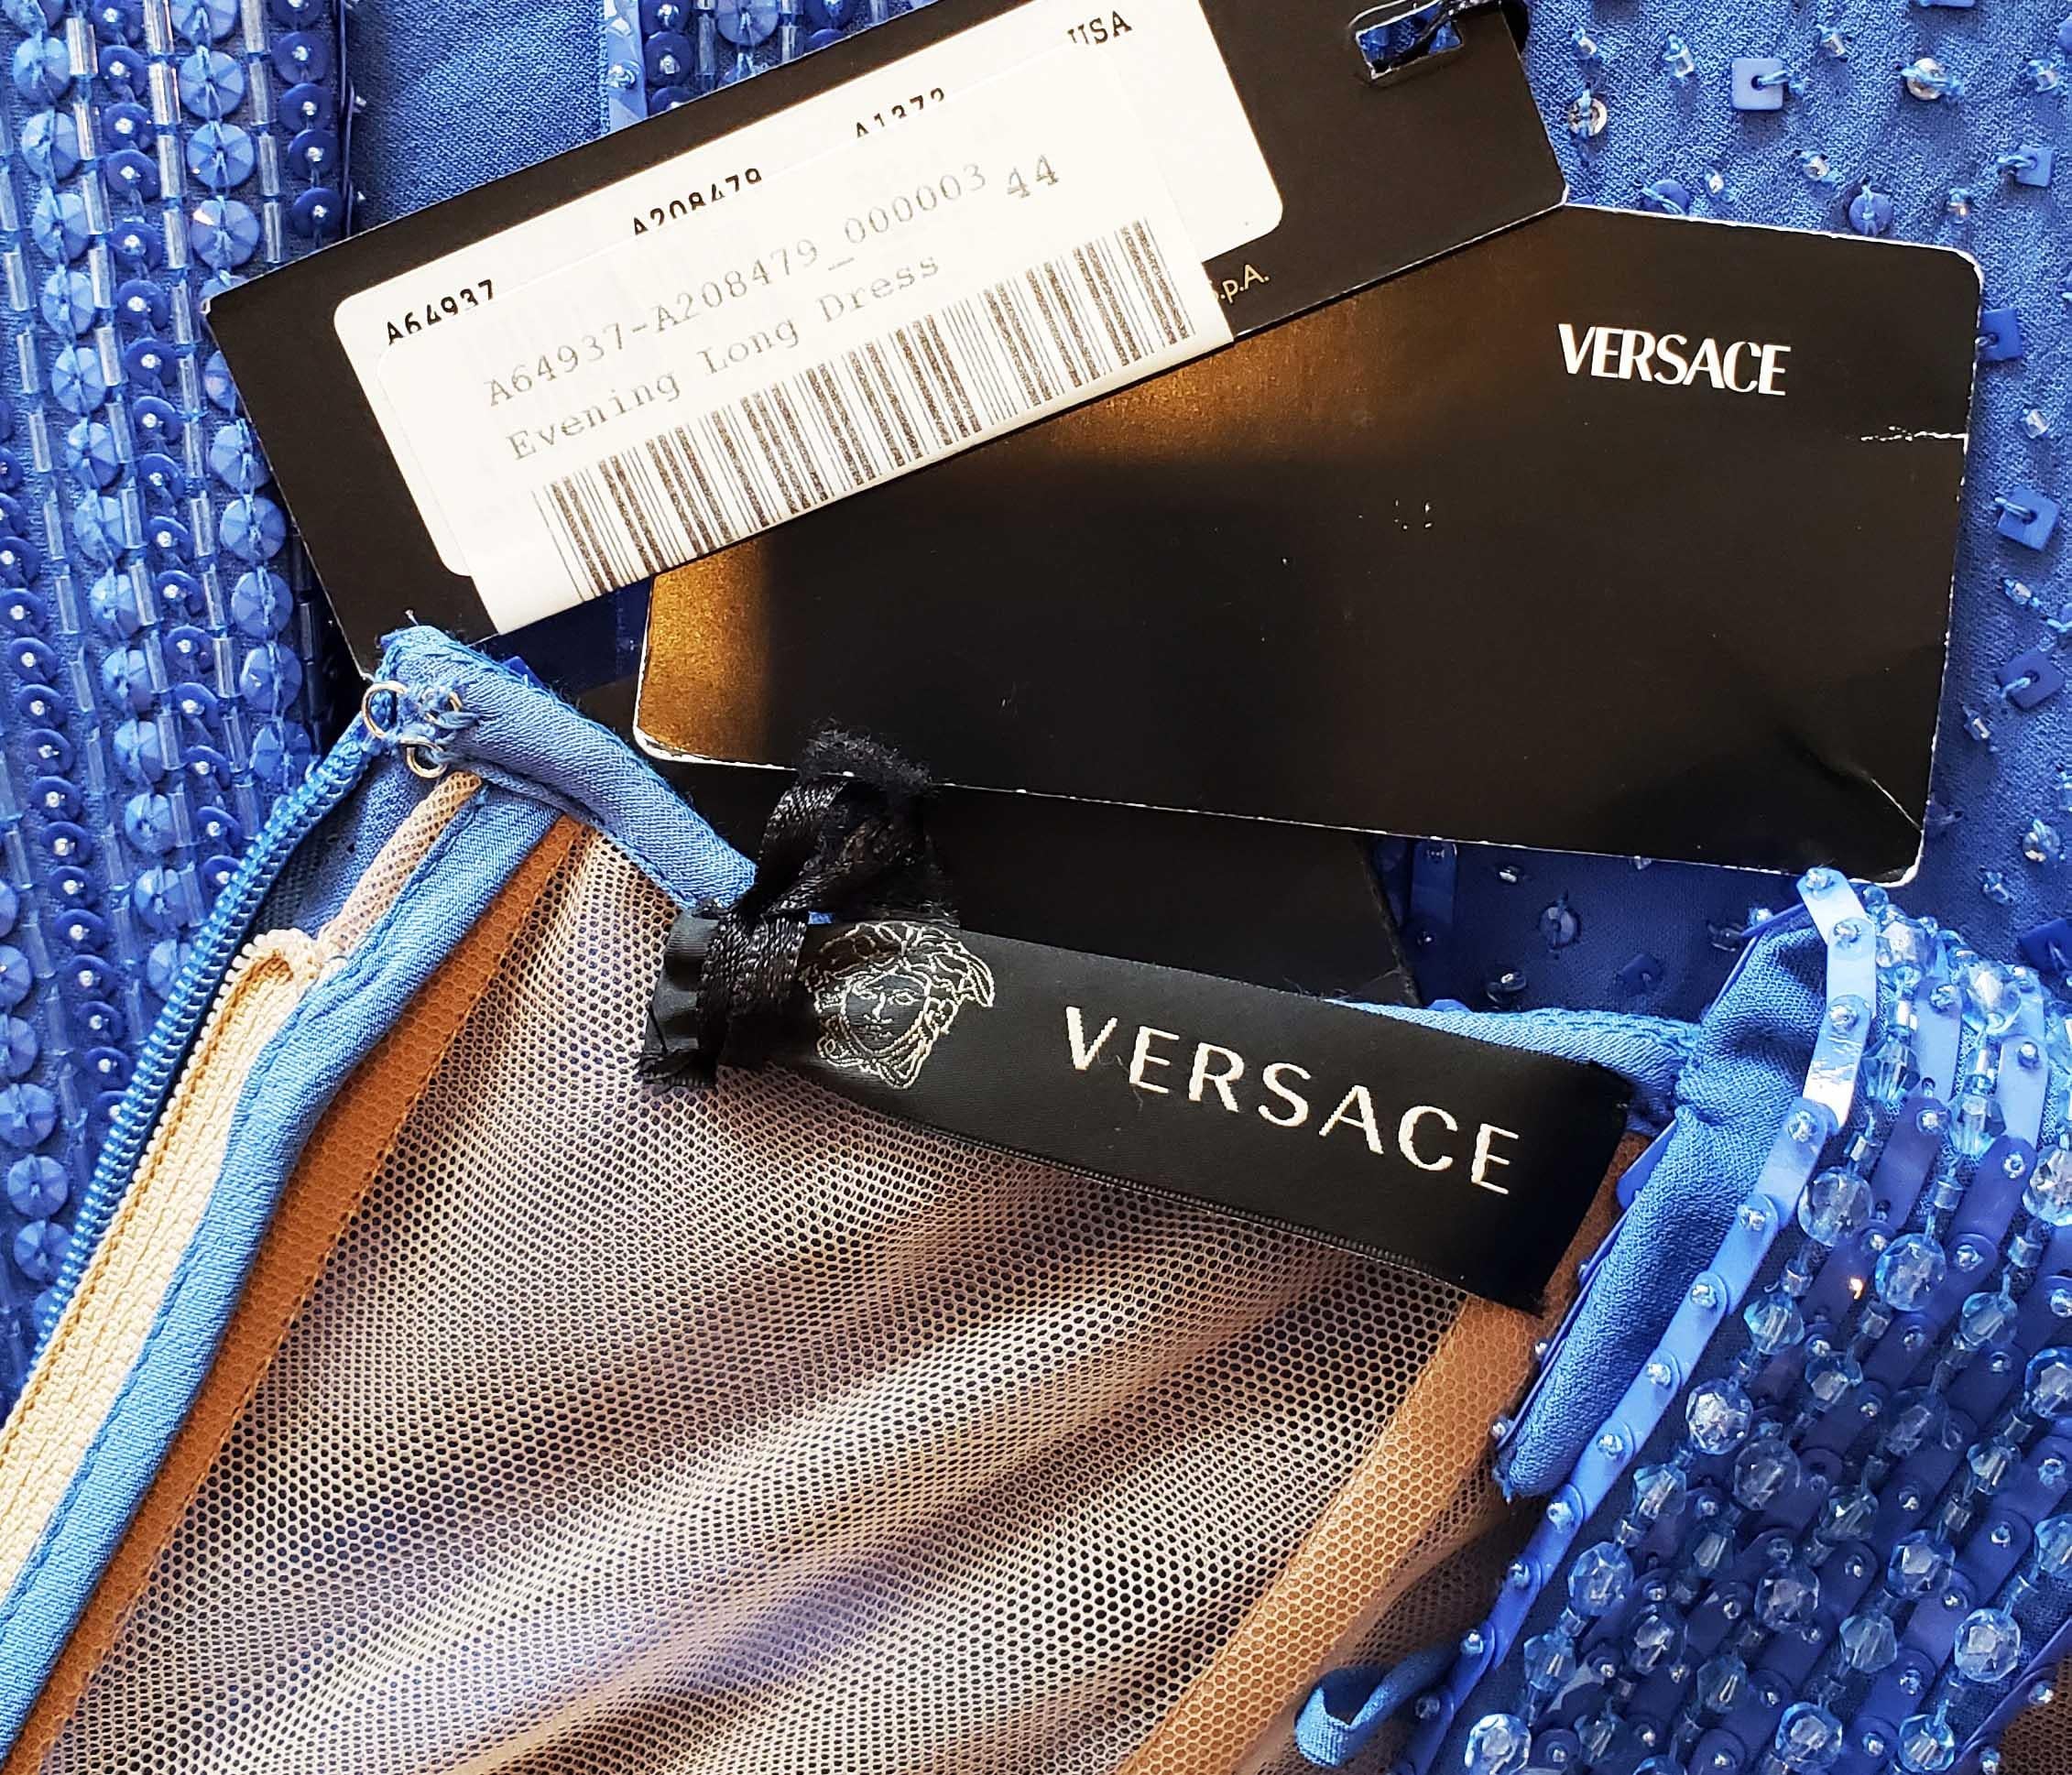 $12, 575 NEW VERSACE EMBELLISHED BLUE Gown 44 - 8 5